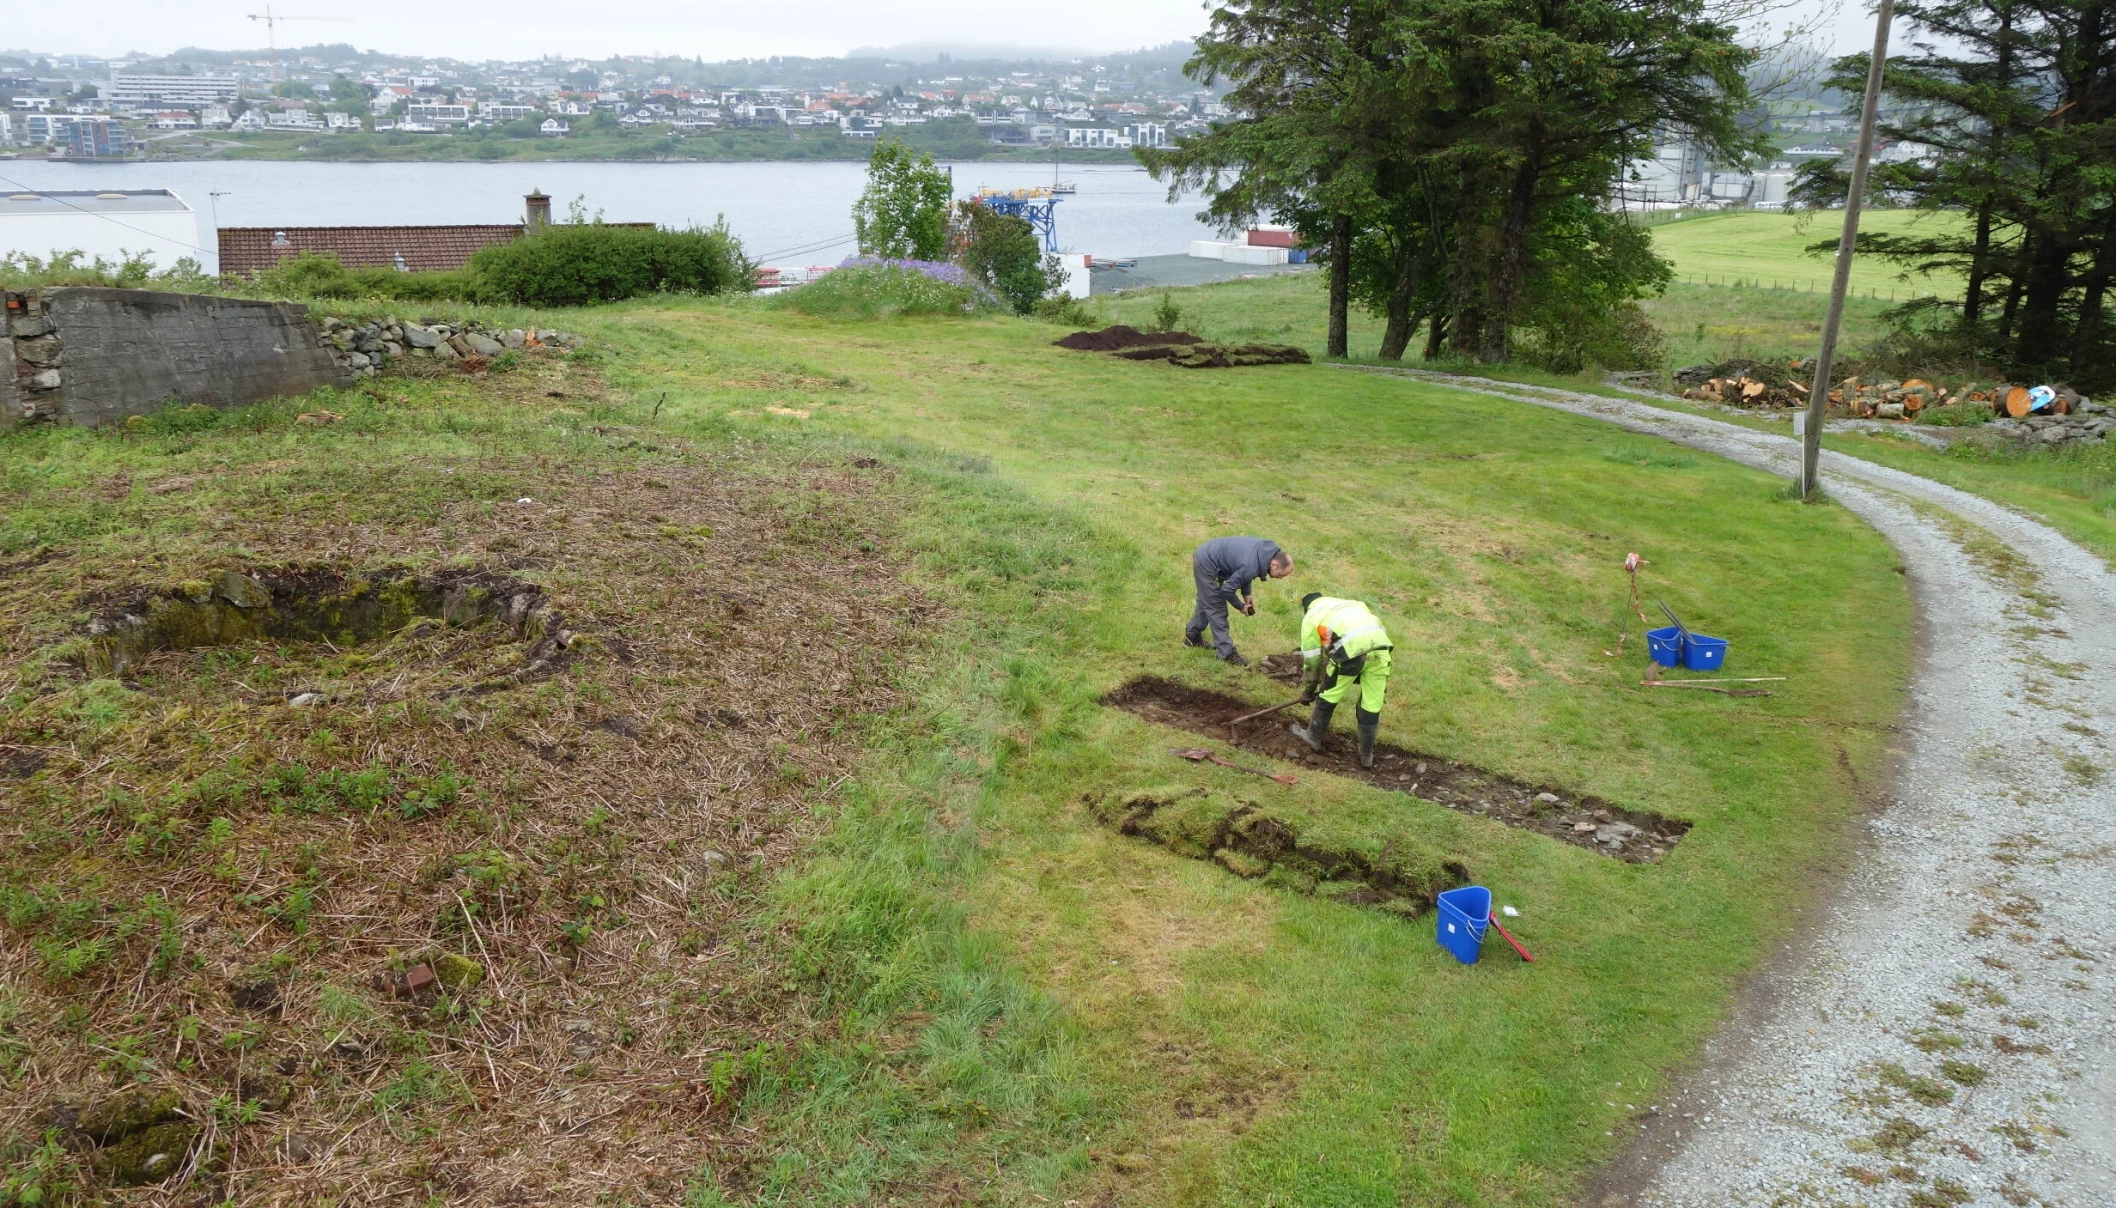 In June of last year, archaeologists conducting explorations and excavations in Karmøy made an exciting discovery: a previously unknown Viking ship in an old burial mound. Additionally, new information was uncovered about the Storhaug ship, which had been discovered in the 1880s. With this discovery, Karmøy now boasts the distinction of being home to three Viking ships. Image Credit: the Museum of Archaeology at the University of Stavanger.